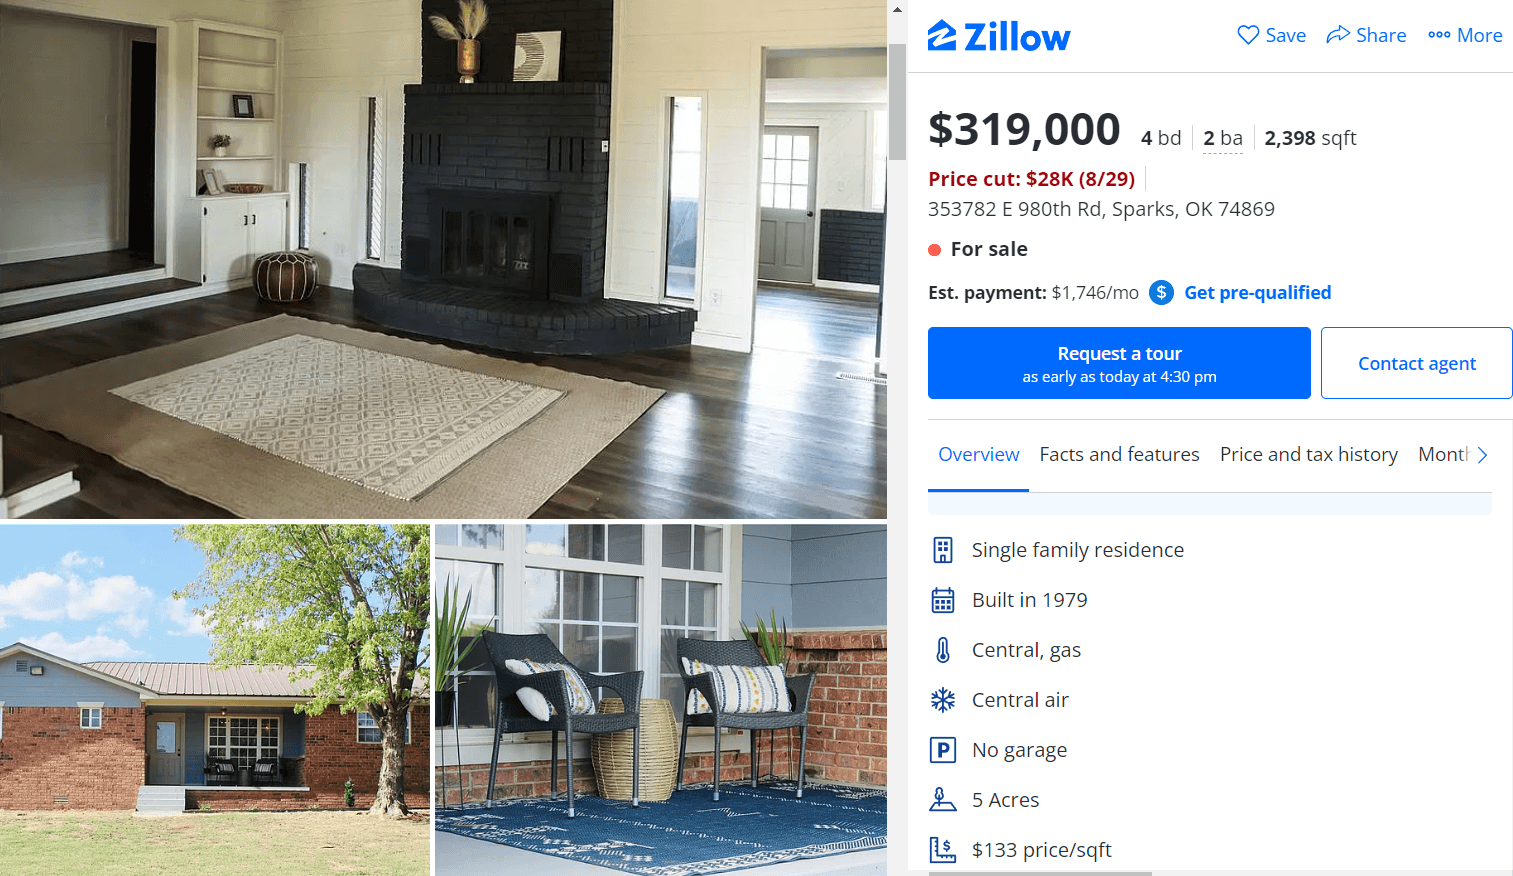 Property Listing Example - Zillow.com